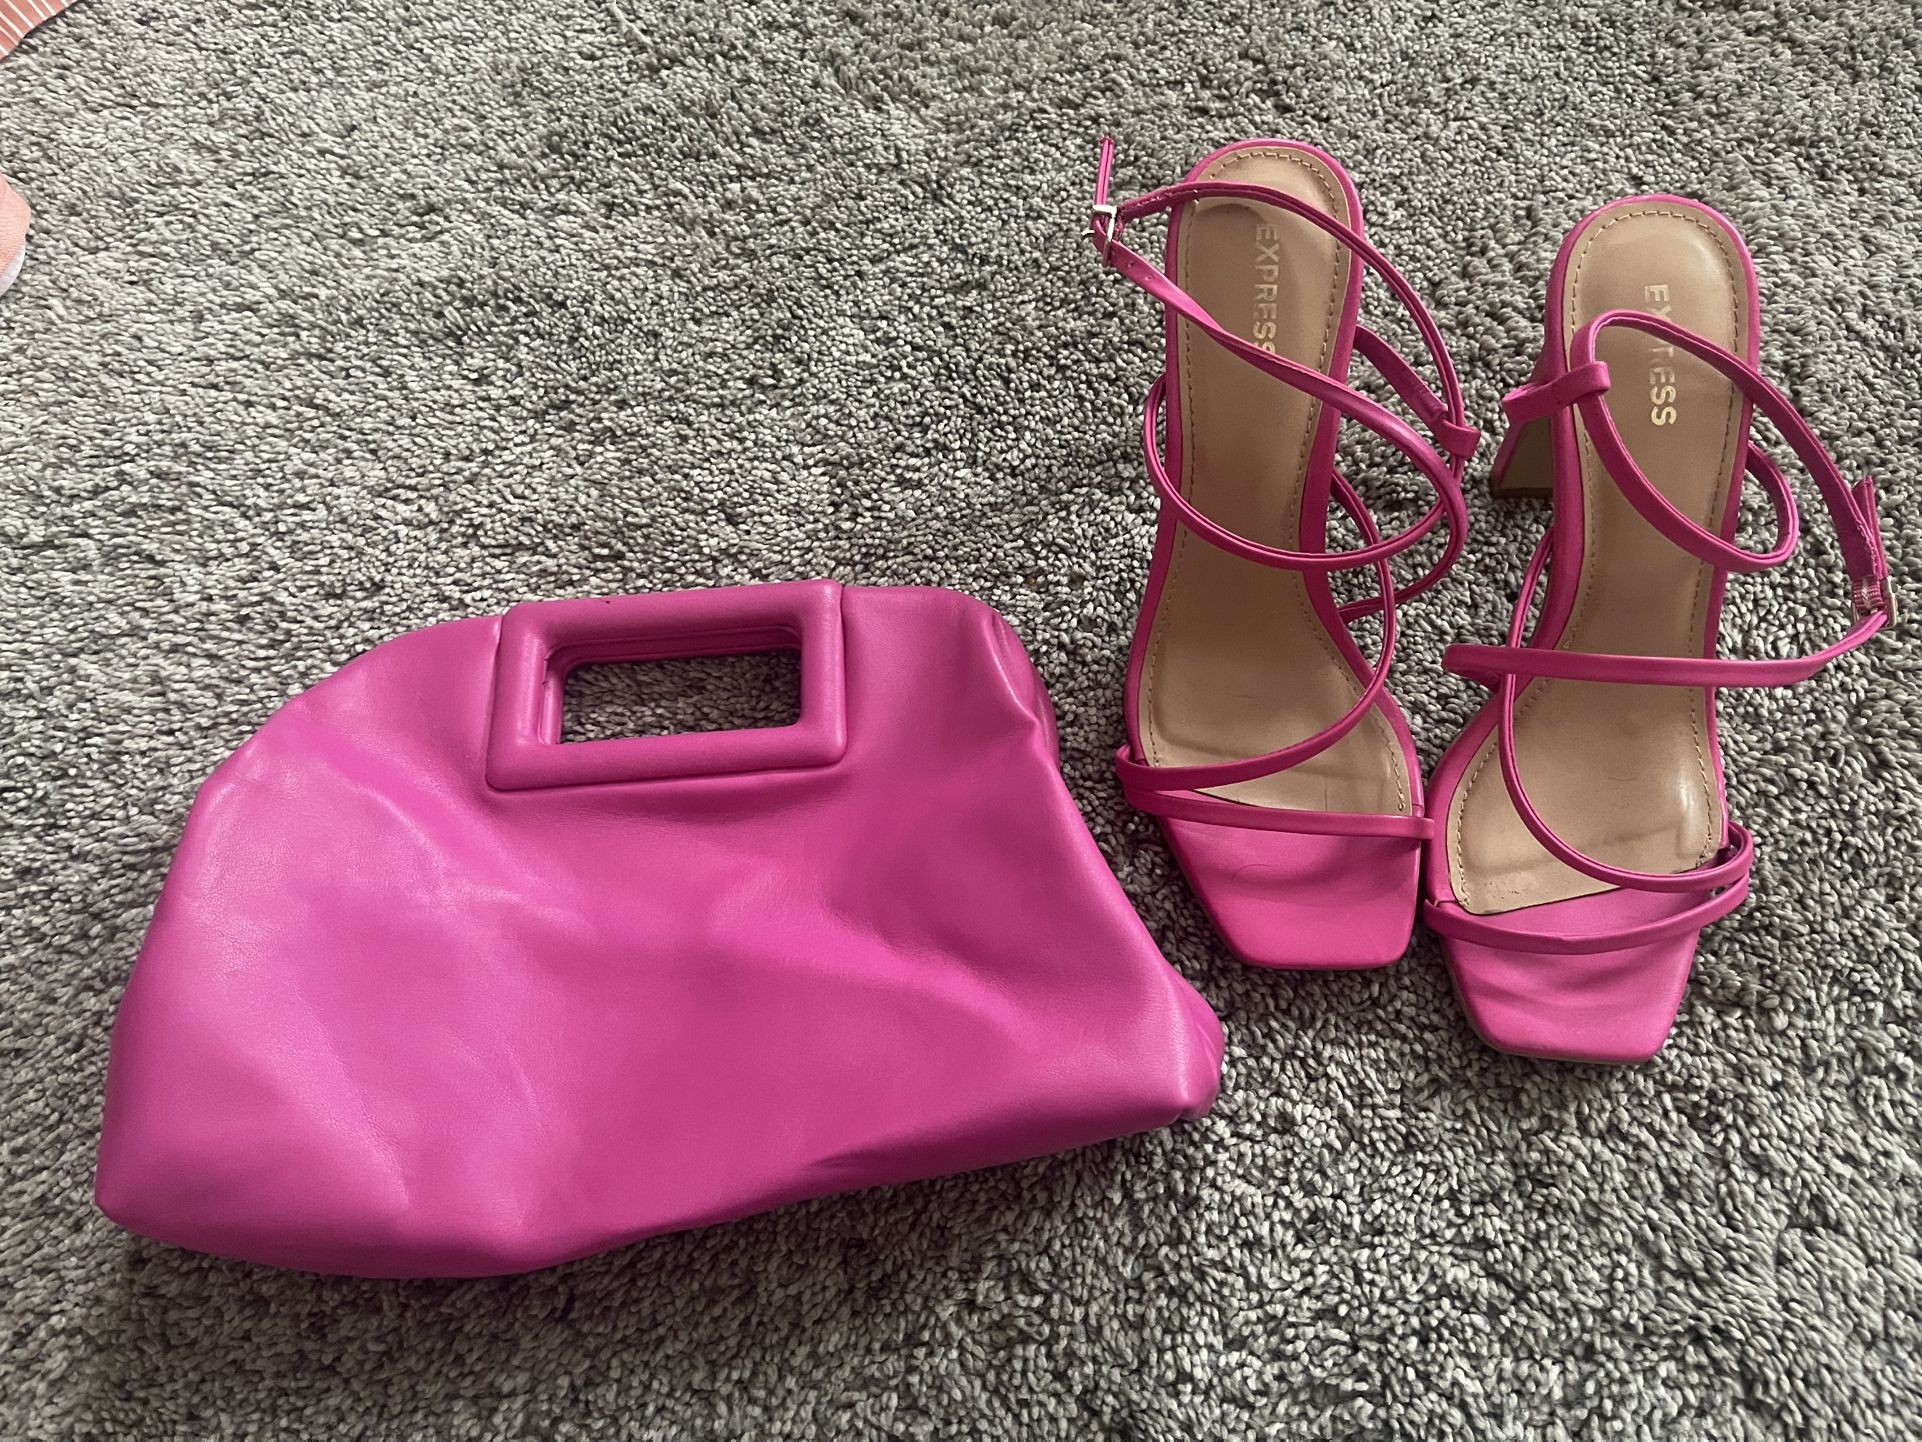 Express Heels And Clutch